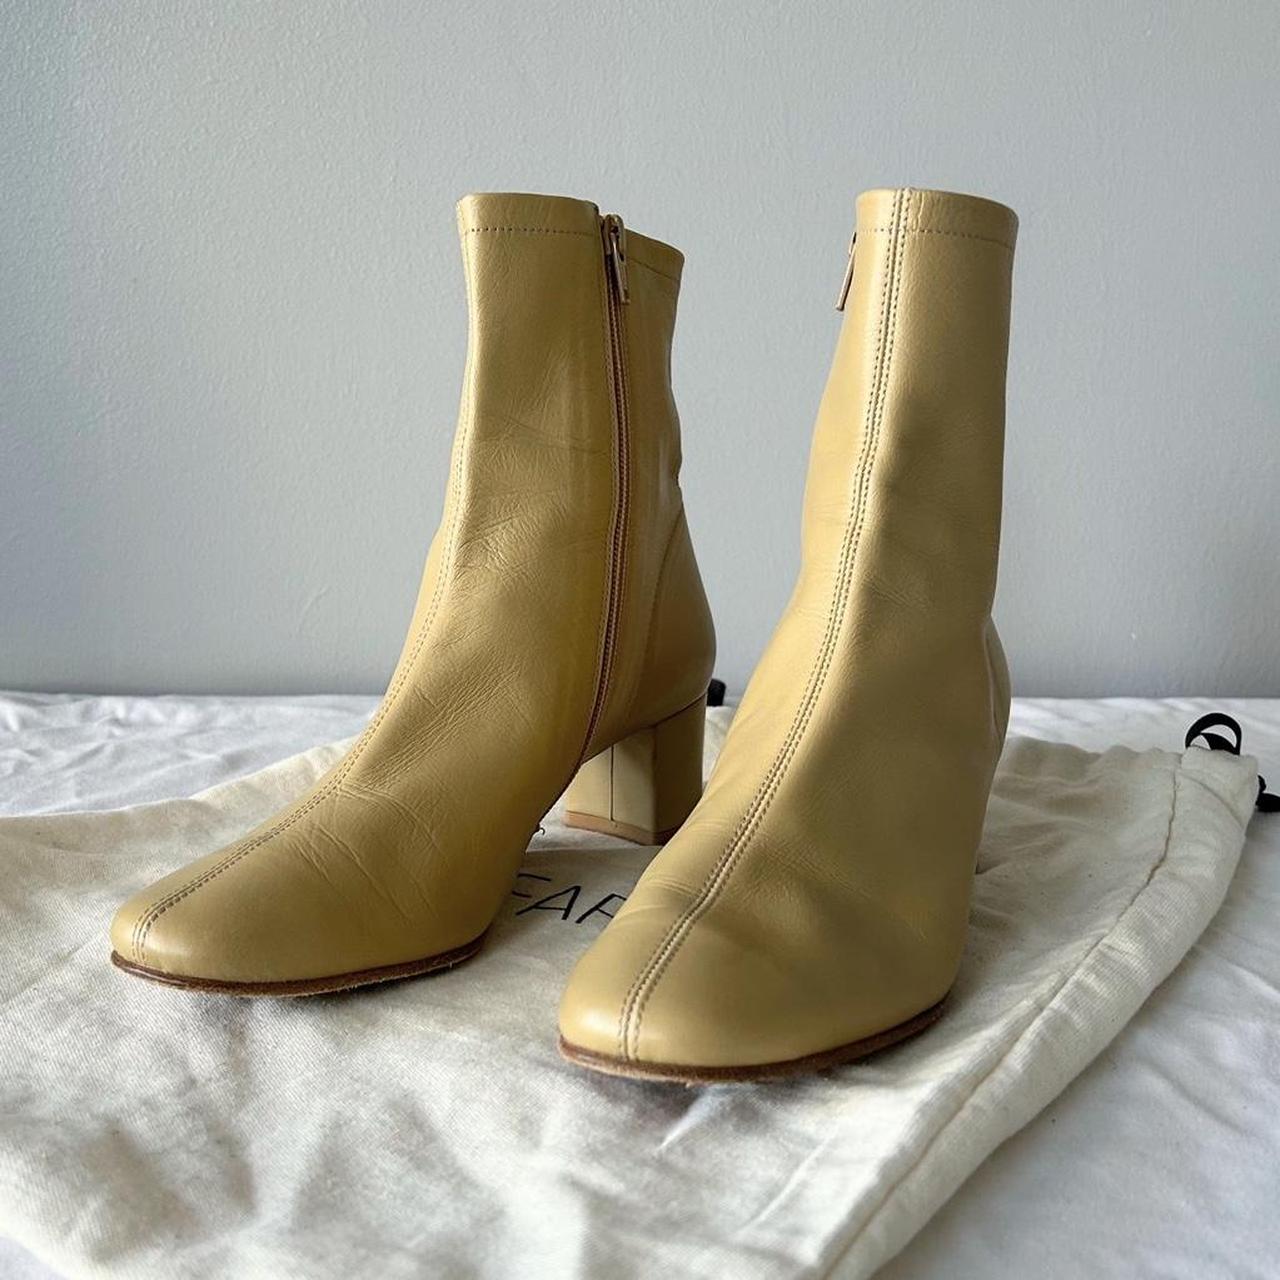 By Far Women's Cream and Tan Boots